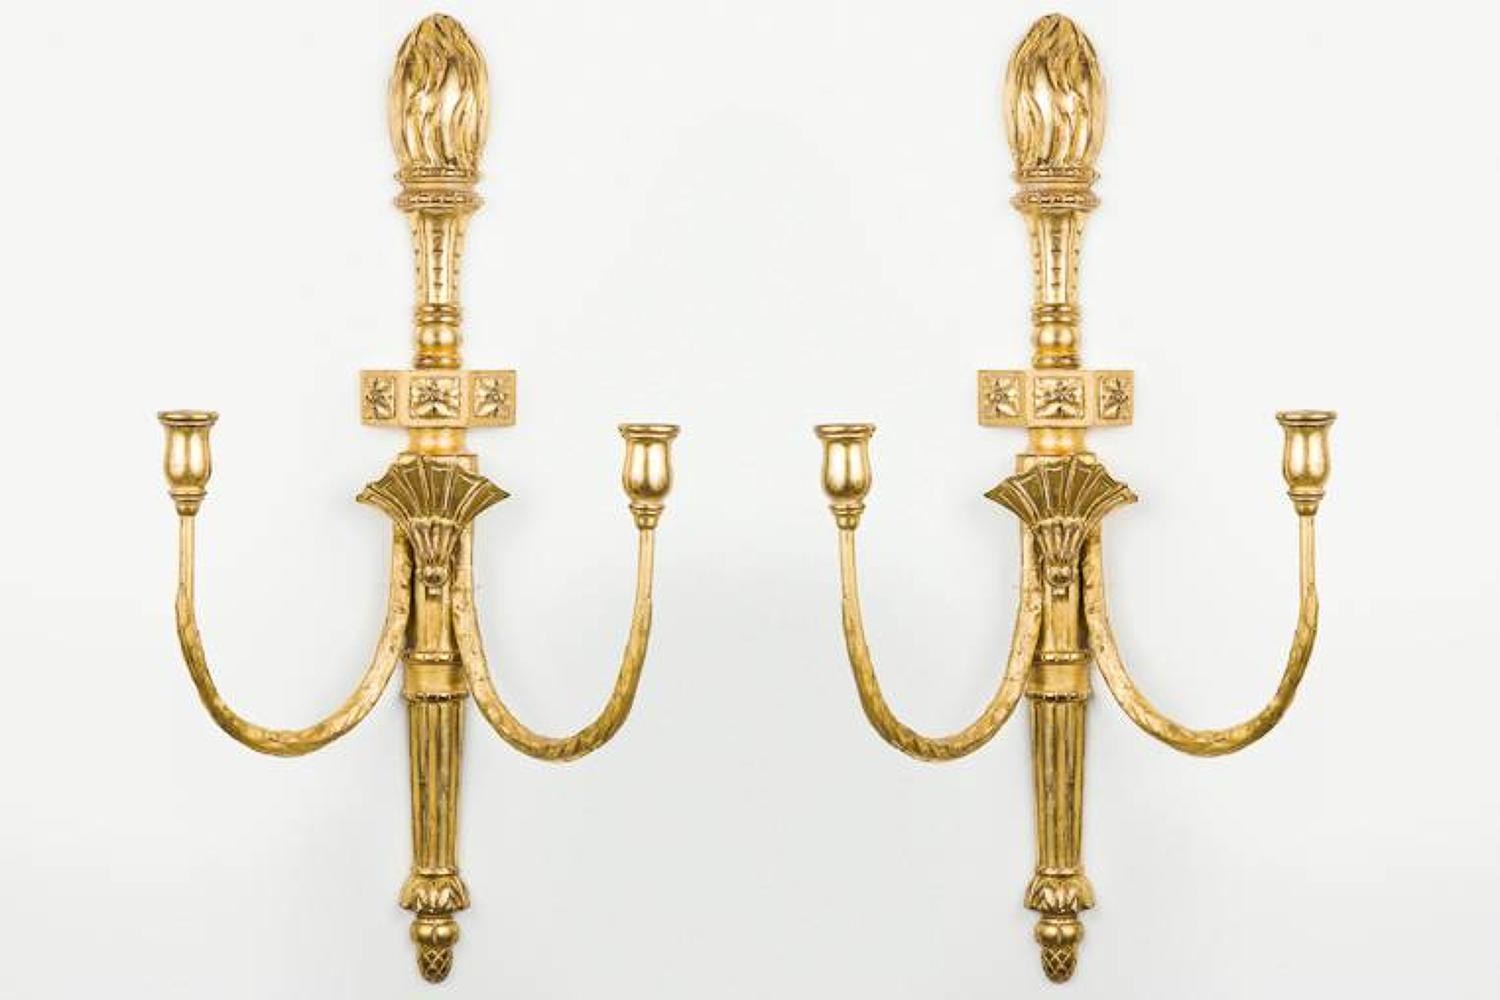 Pair of Giltwood Wall Sconces